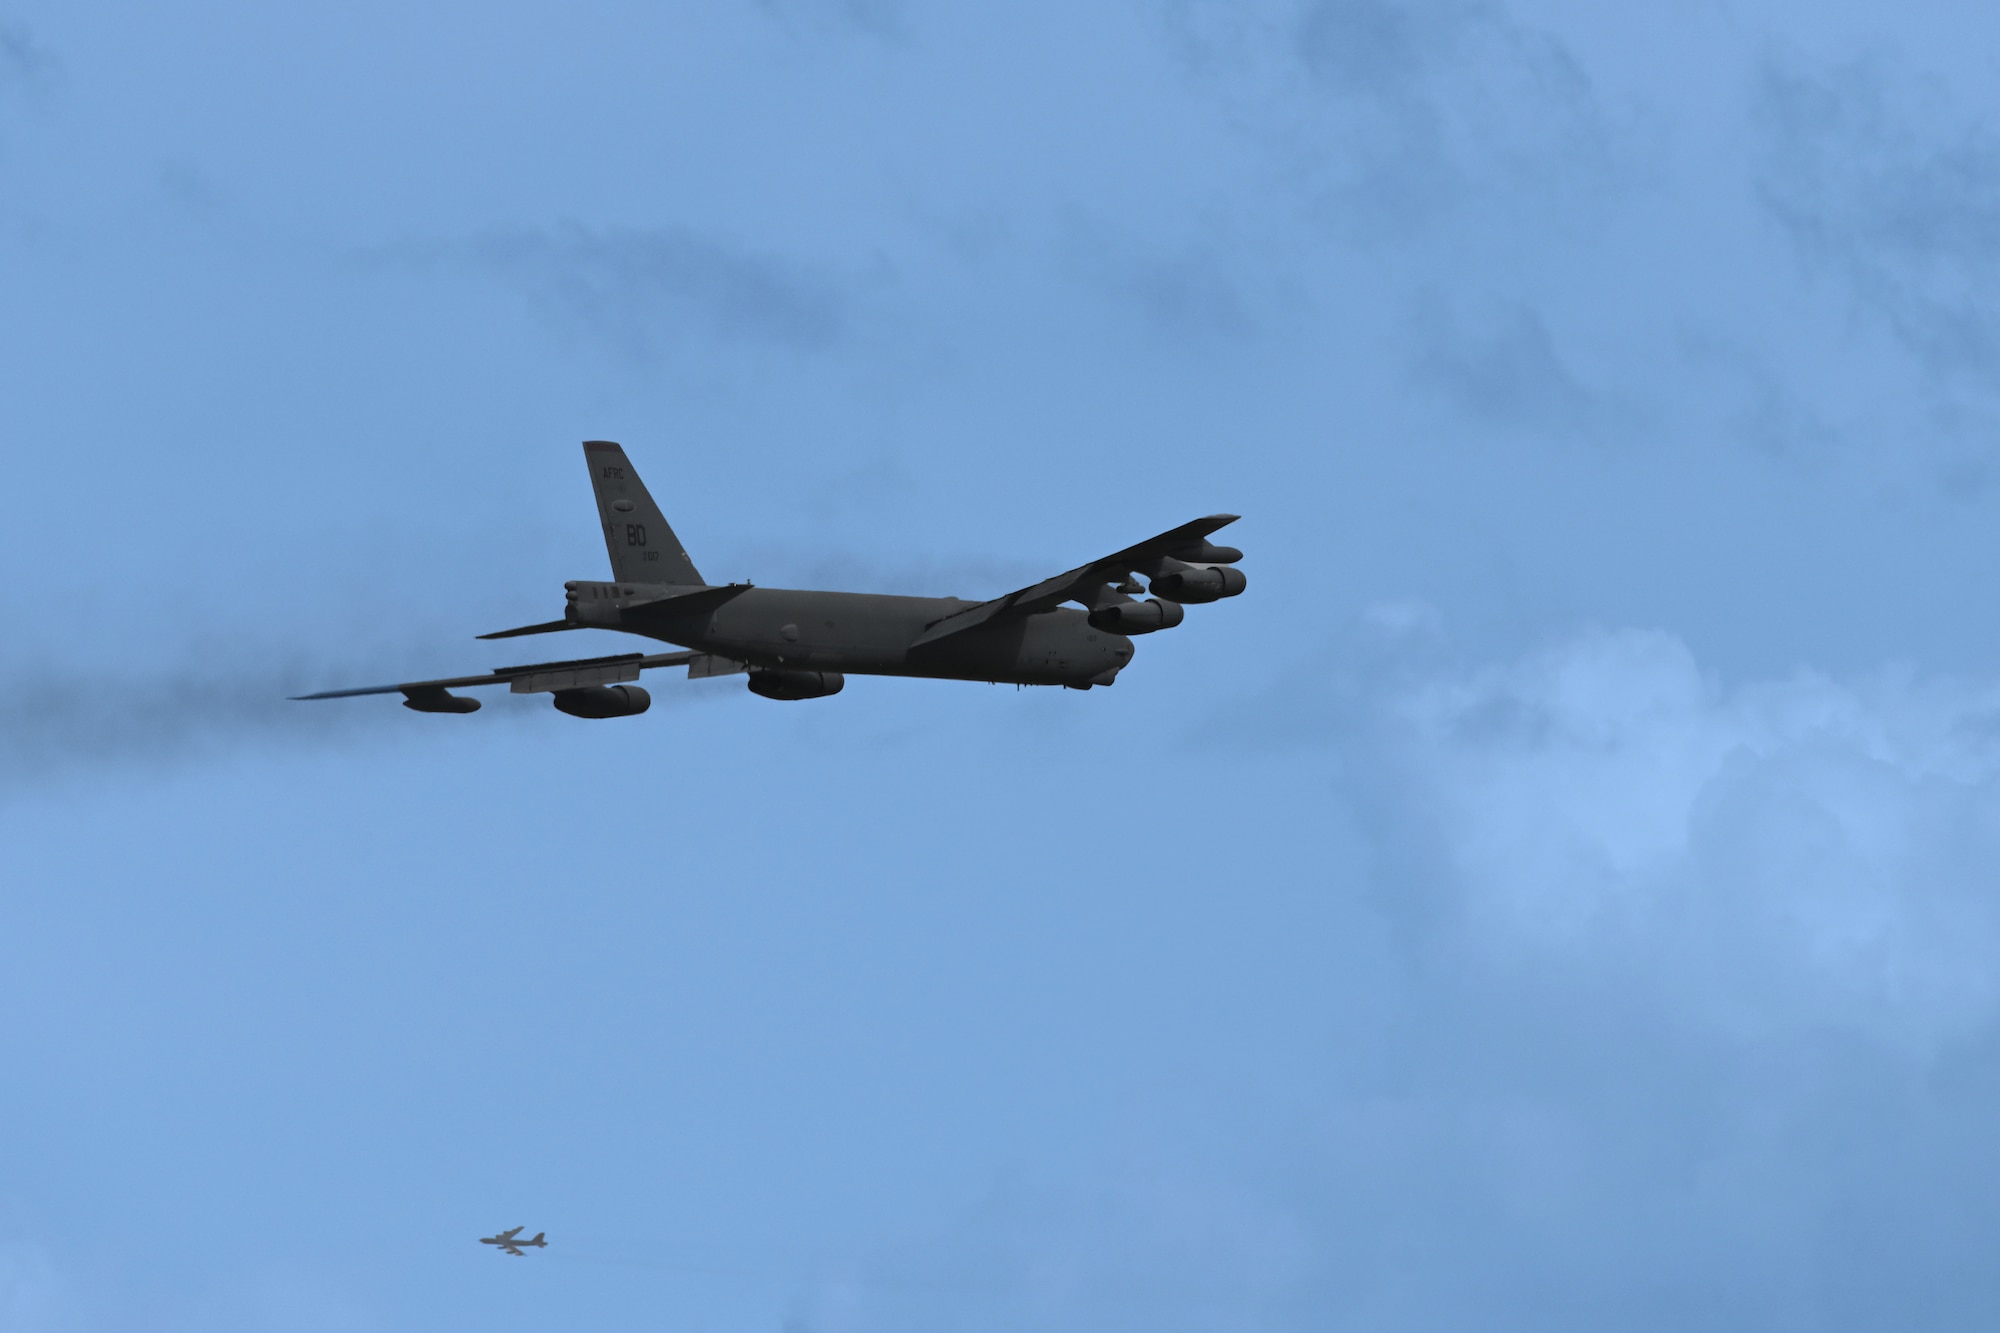 Two B-52's take off into a blue sky.